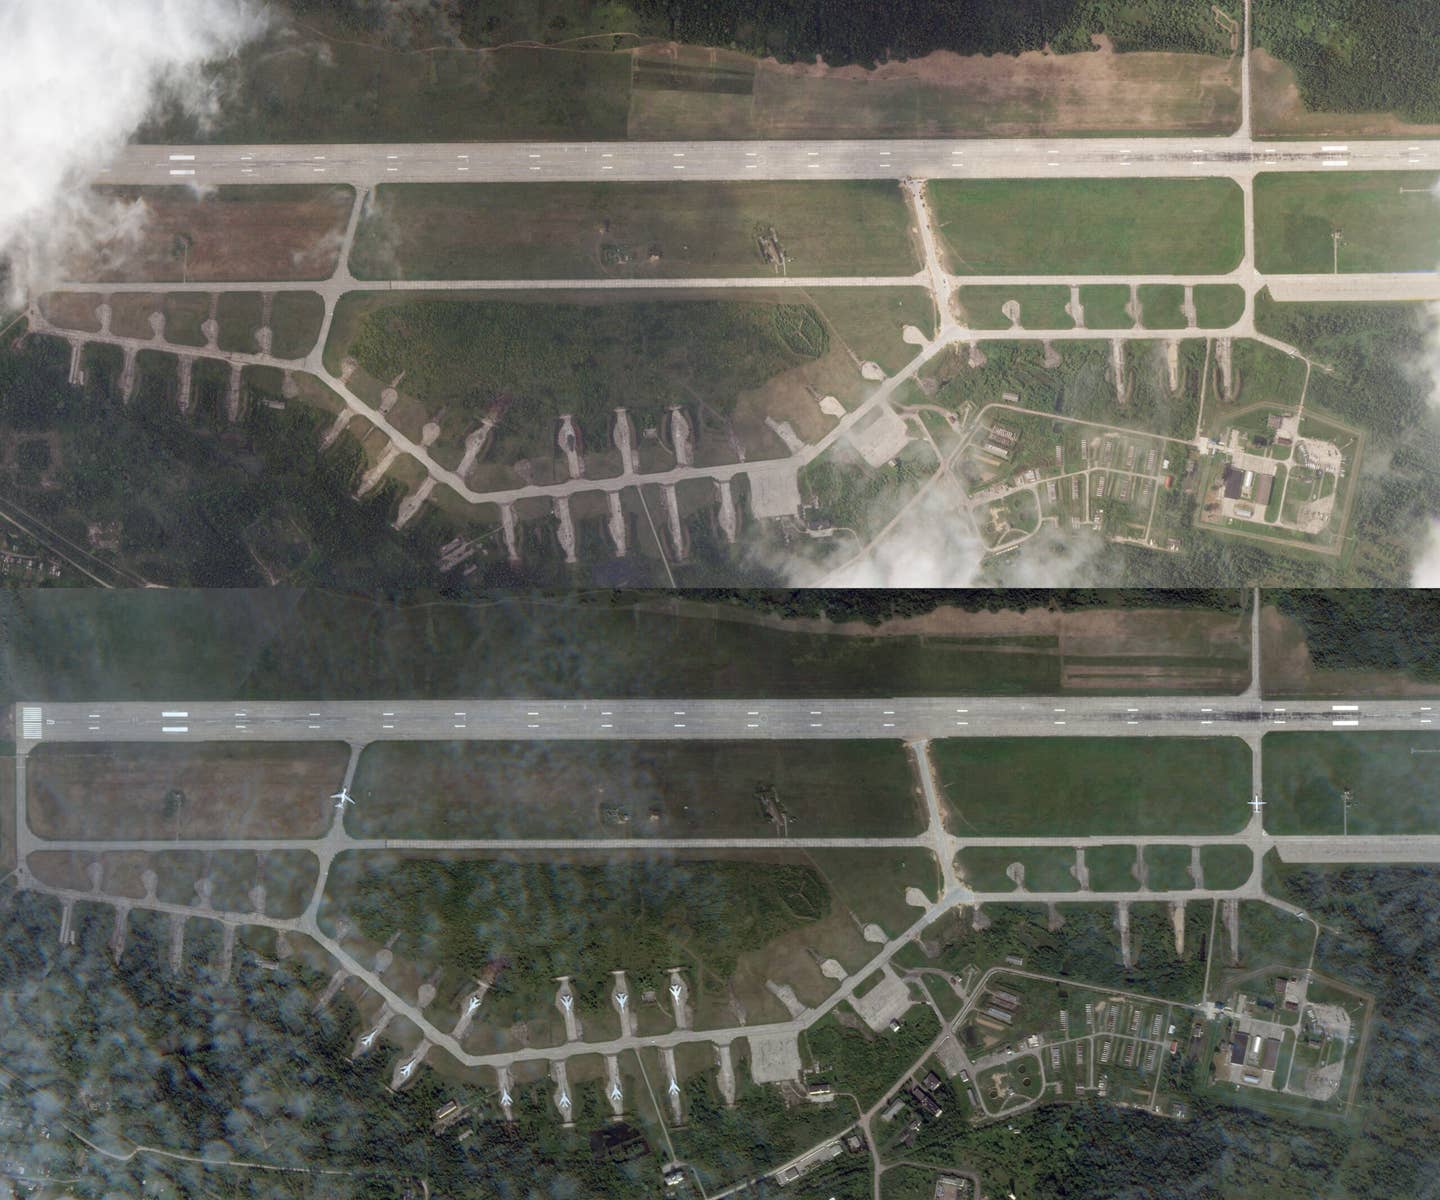 A side-by-side comparison of Planet Labs satellite images taken on Aug. 21 (top) and Aug. 16 (bottom) shows not only the damaged Backfire, but that at least nine others have since been moved. <em>PHOTO © 2023 PLANET LABS INC. ALL RIGHTS RESERVED. REPRINTED BY PERMISSION</em>